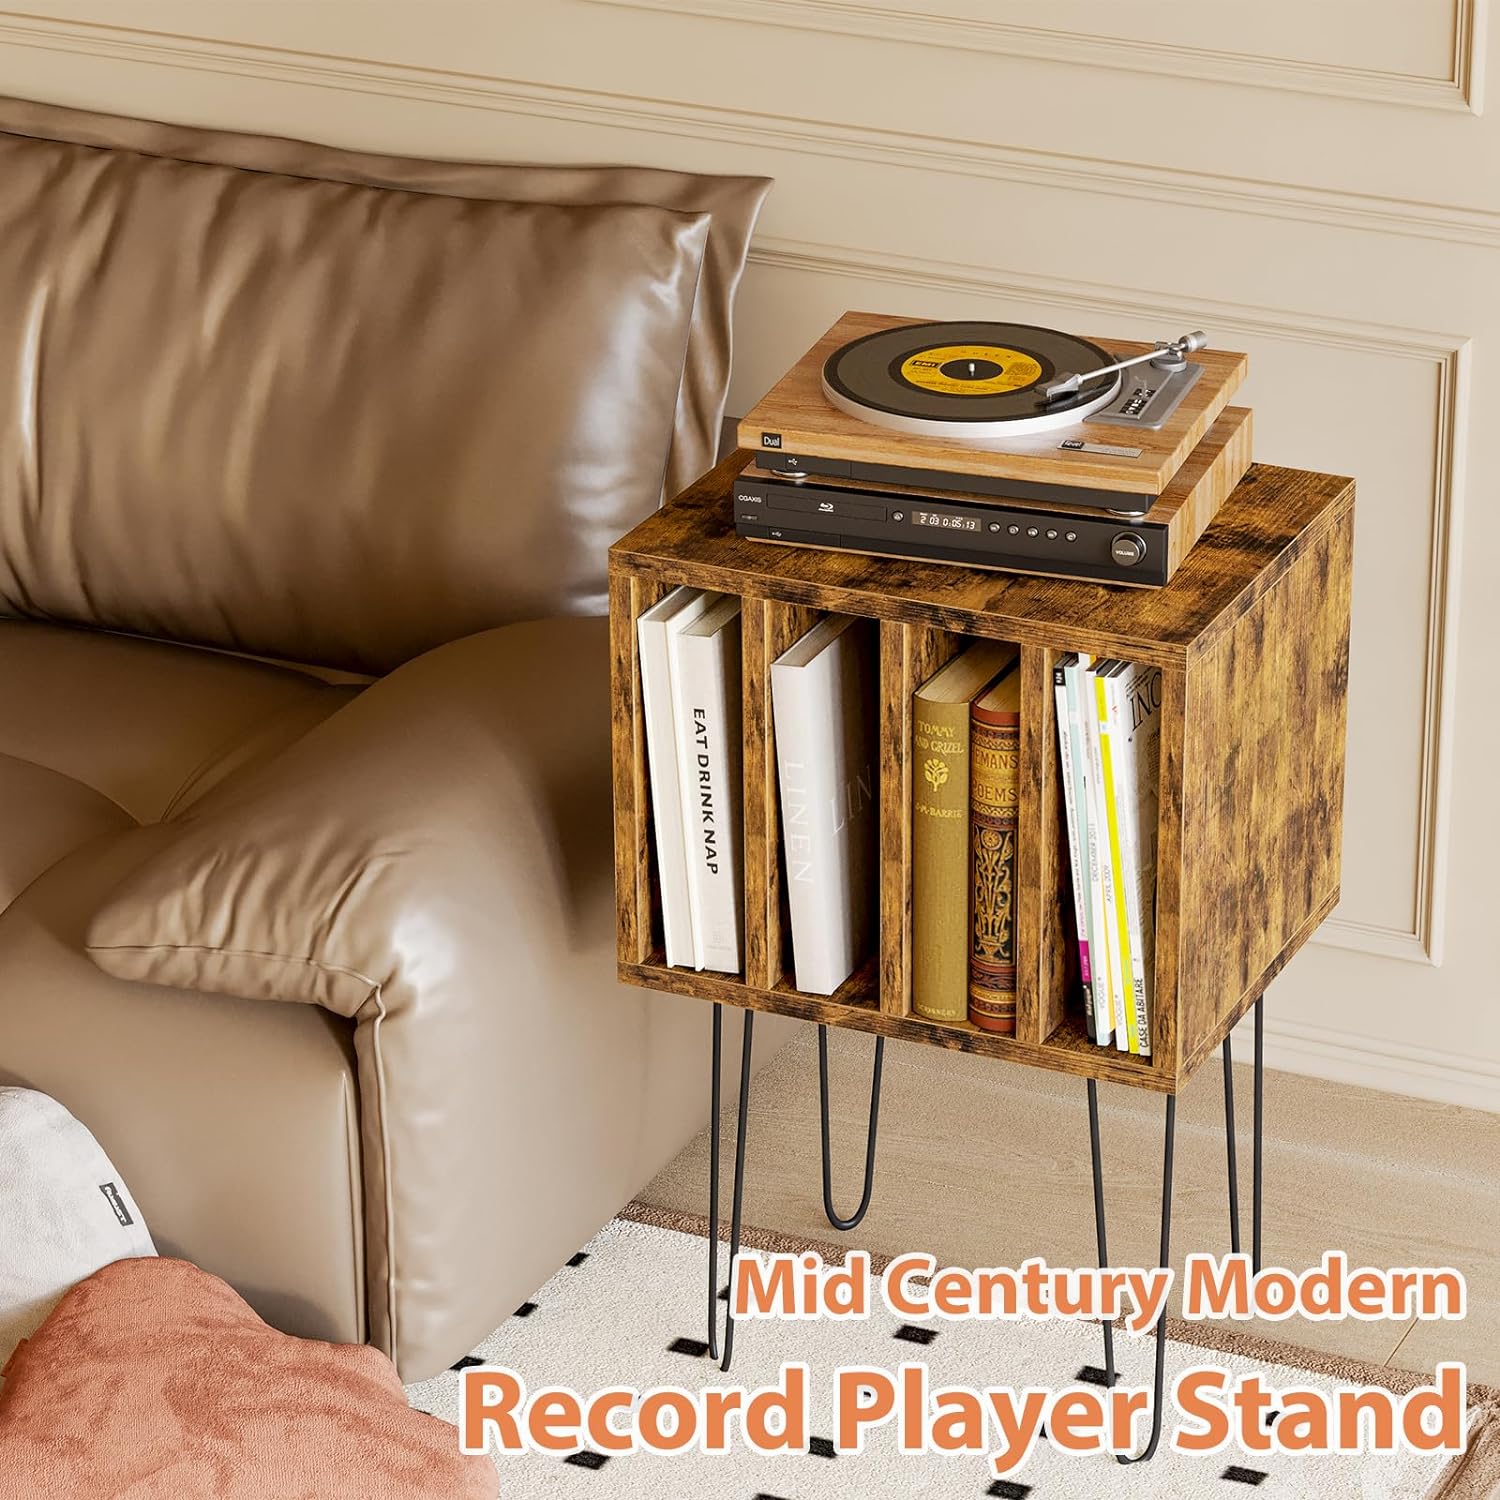 Vinyl Record Storage Table with 4 Cabinets for 100 Albums